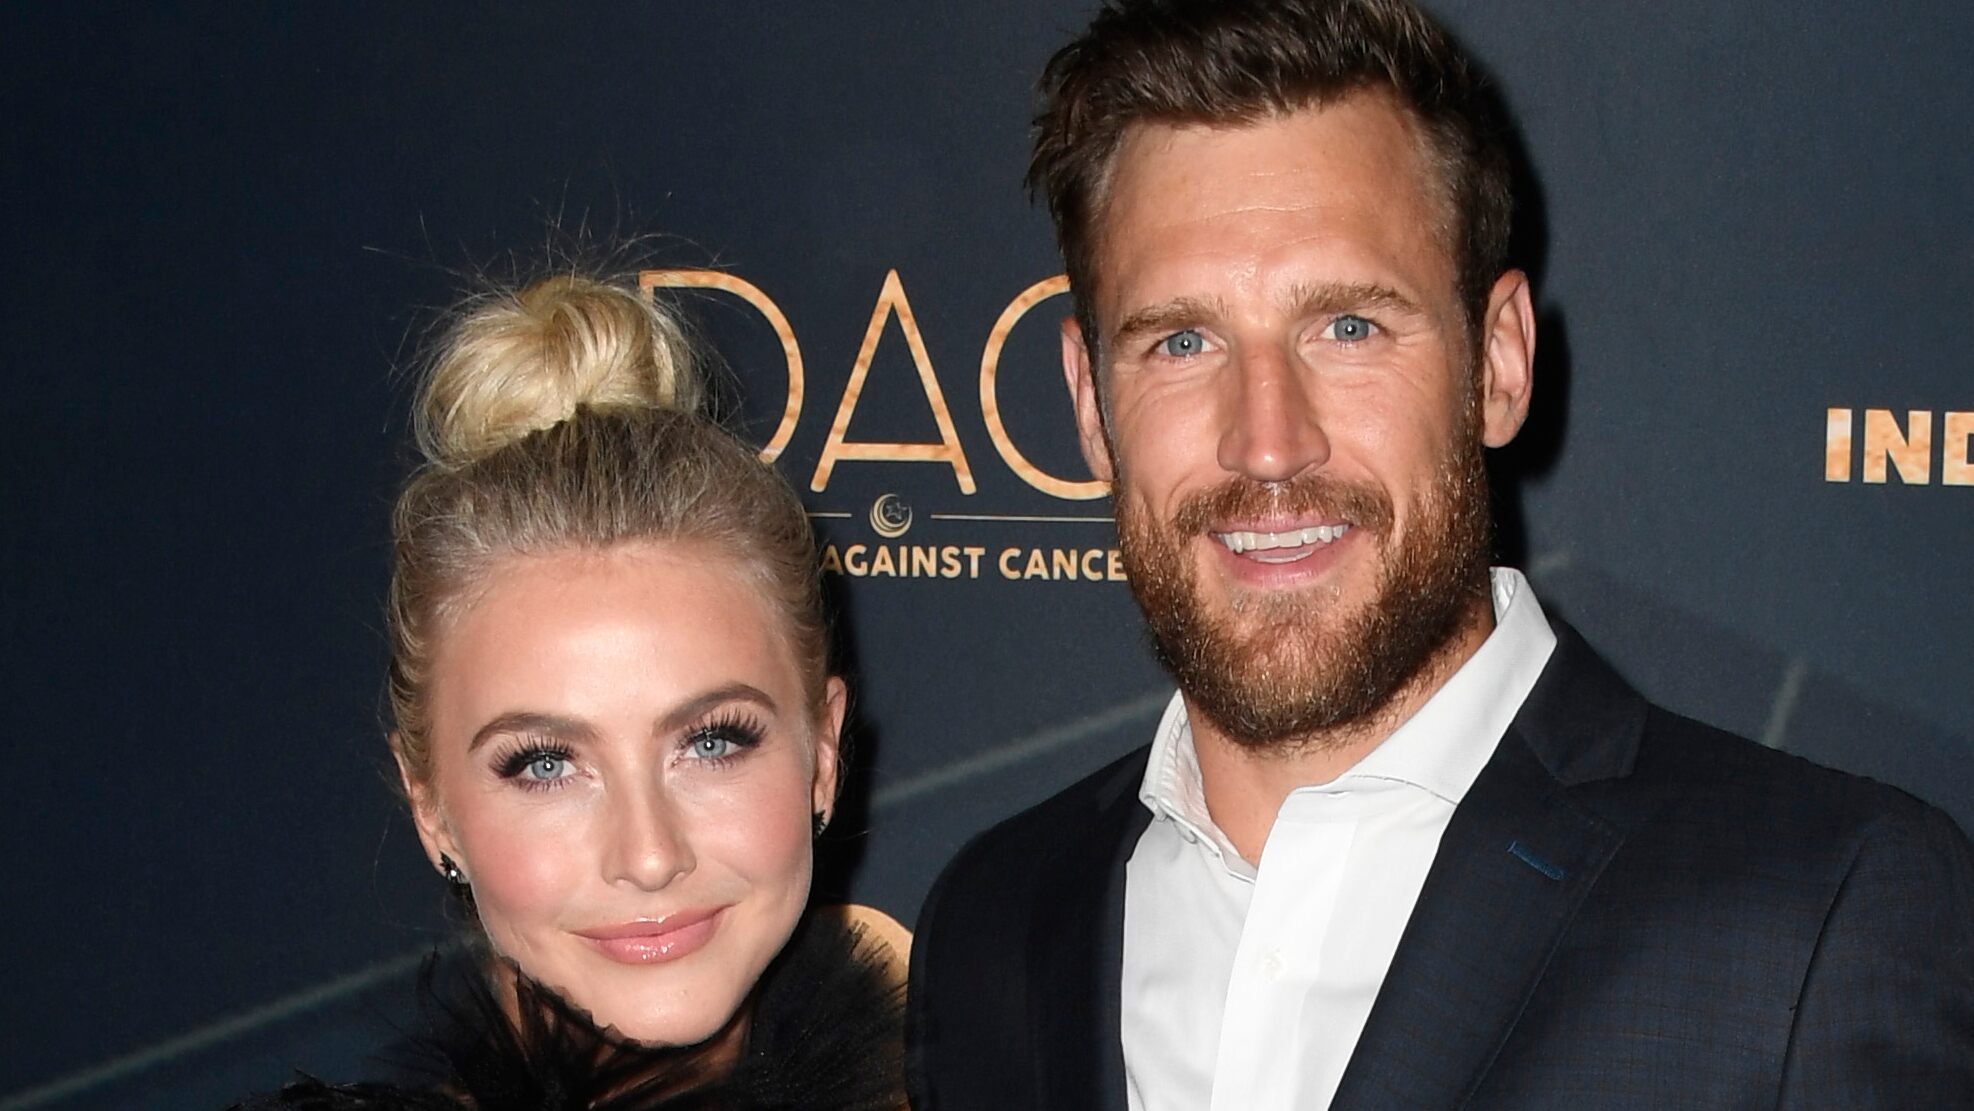 Julianne Hough's husband Brooks Laich reveals goal of exploring 'intimacy and sexuality' more in 2020 - www.foxnews.com - Turkey